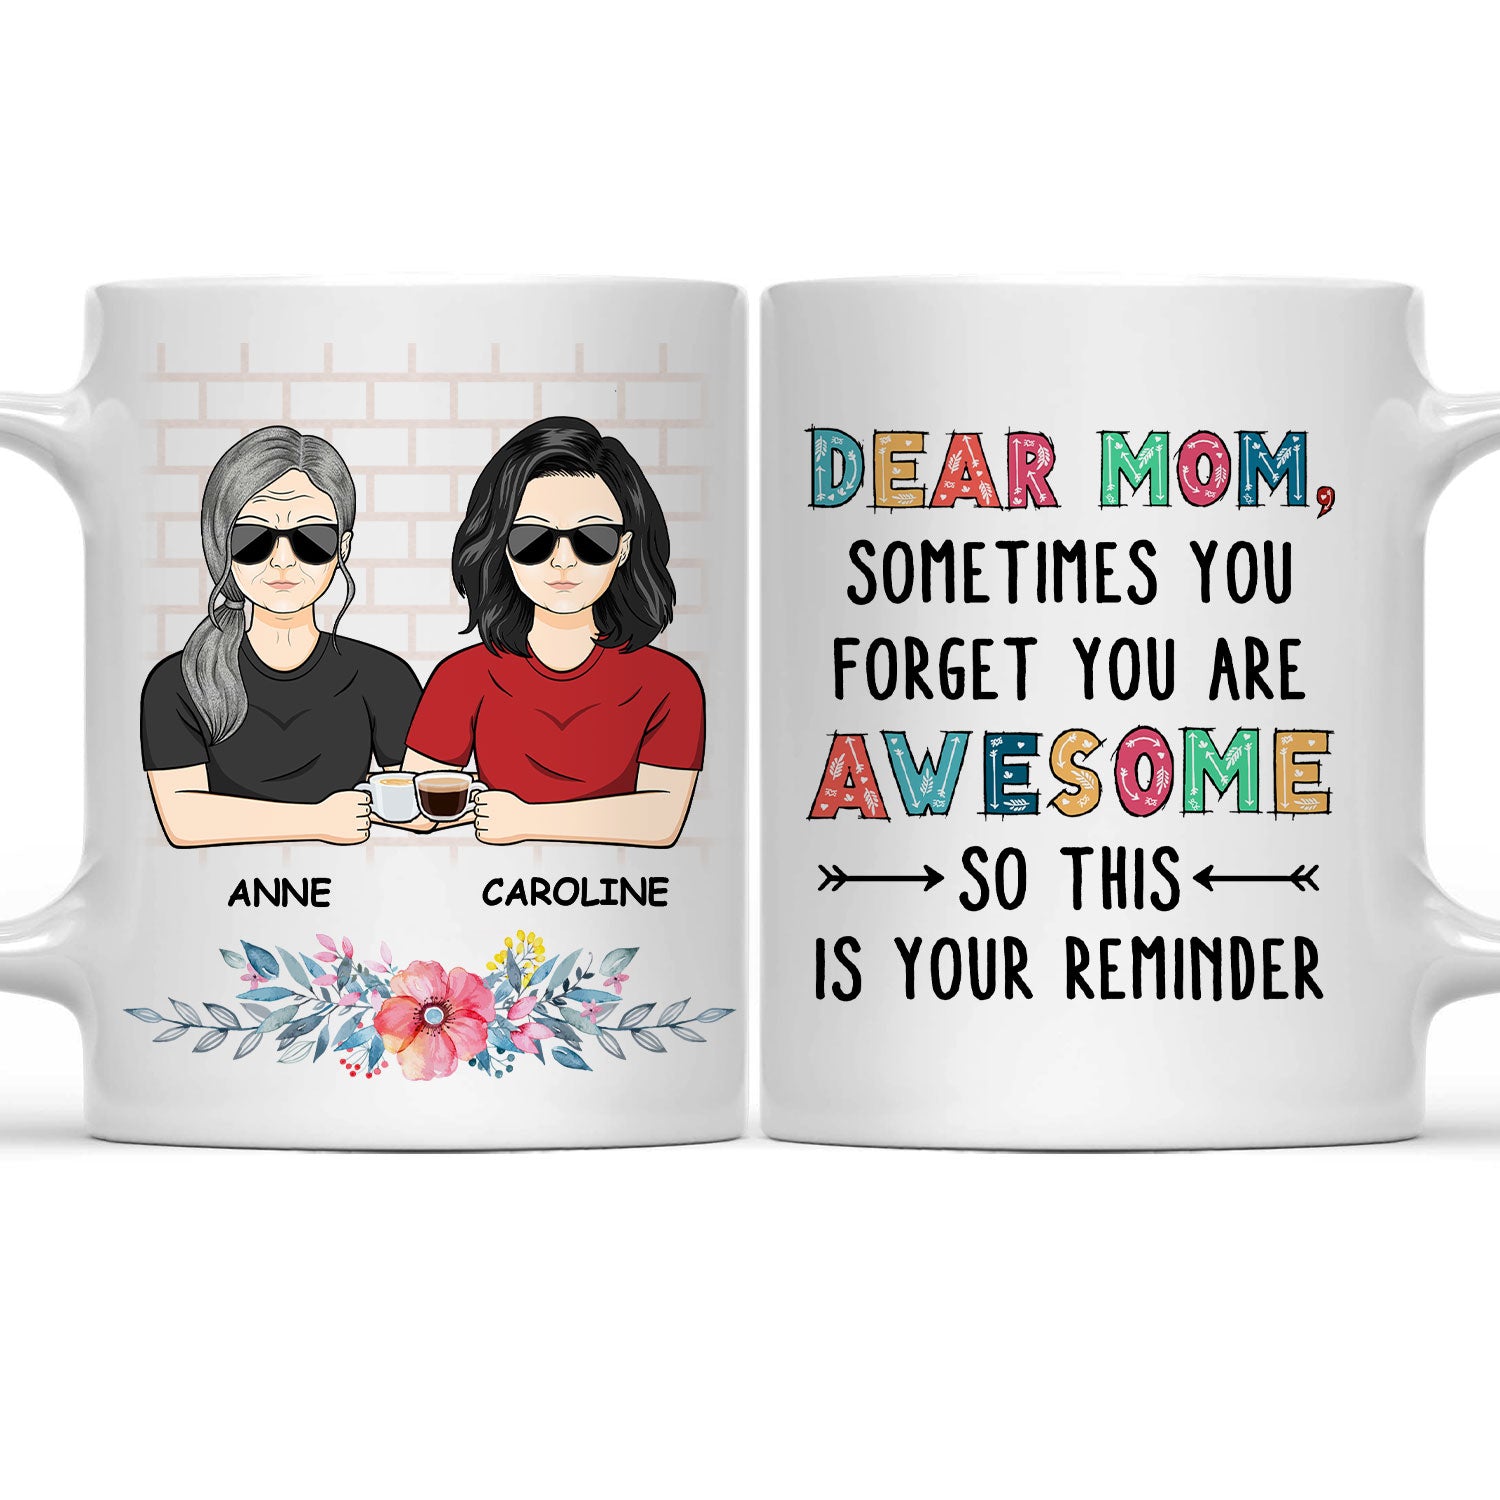 Dear Mom Sometimes You Forget So This Is Your Reminder - Birthday, Loving Gift For Mom, Mother, Grandma, Grandmother - Personalized Custom Mug